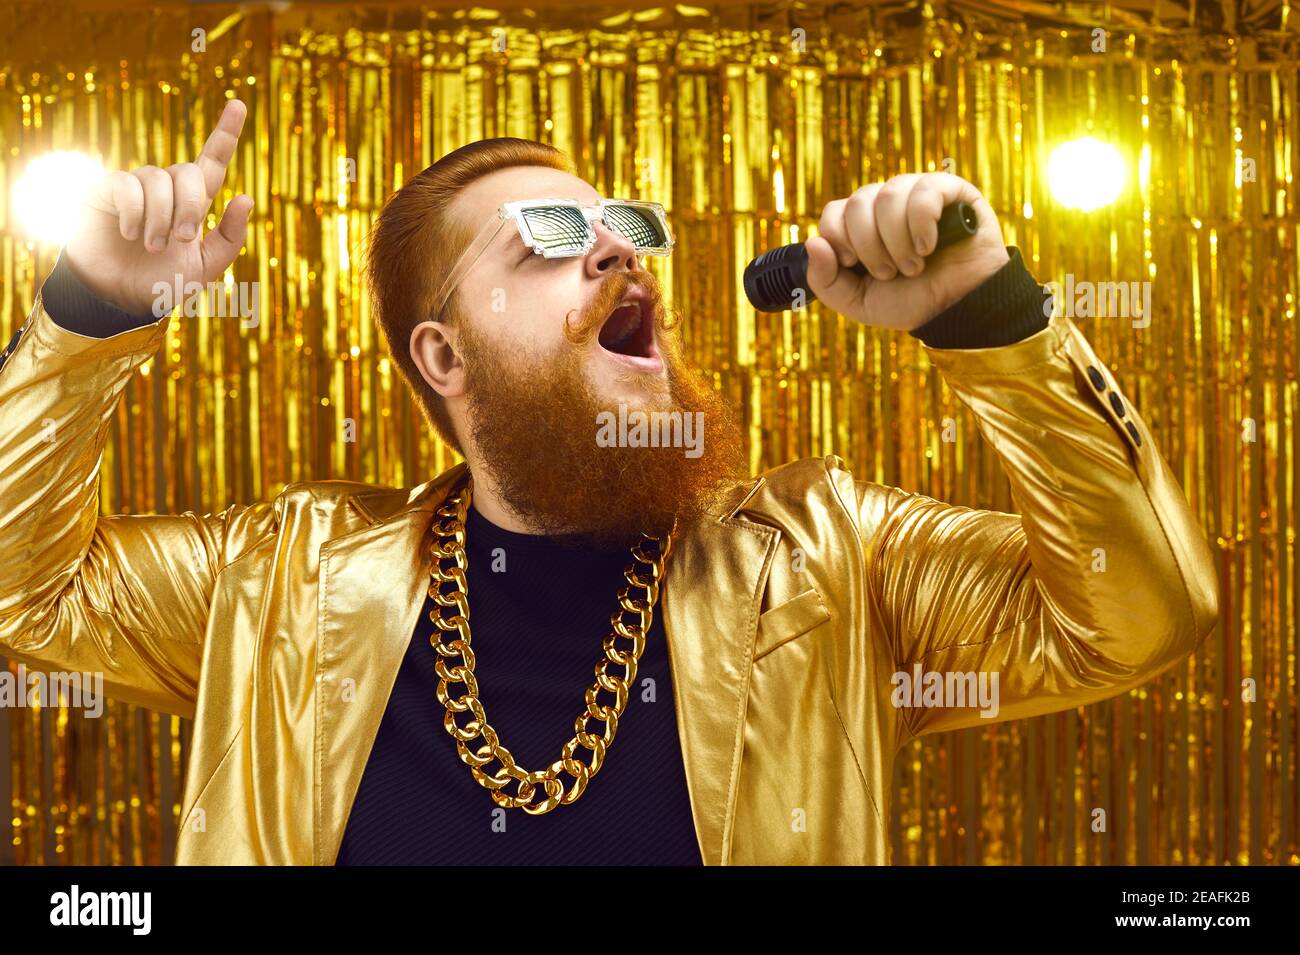 Singer in extravagant shiny jacket holding microphone and singing songs at concert Stock Photo